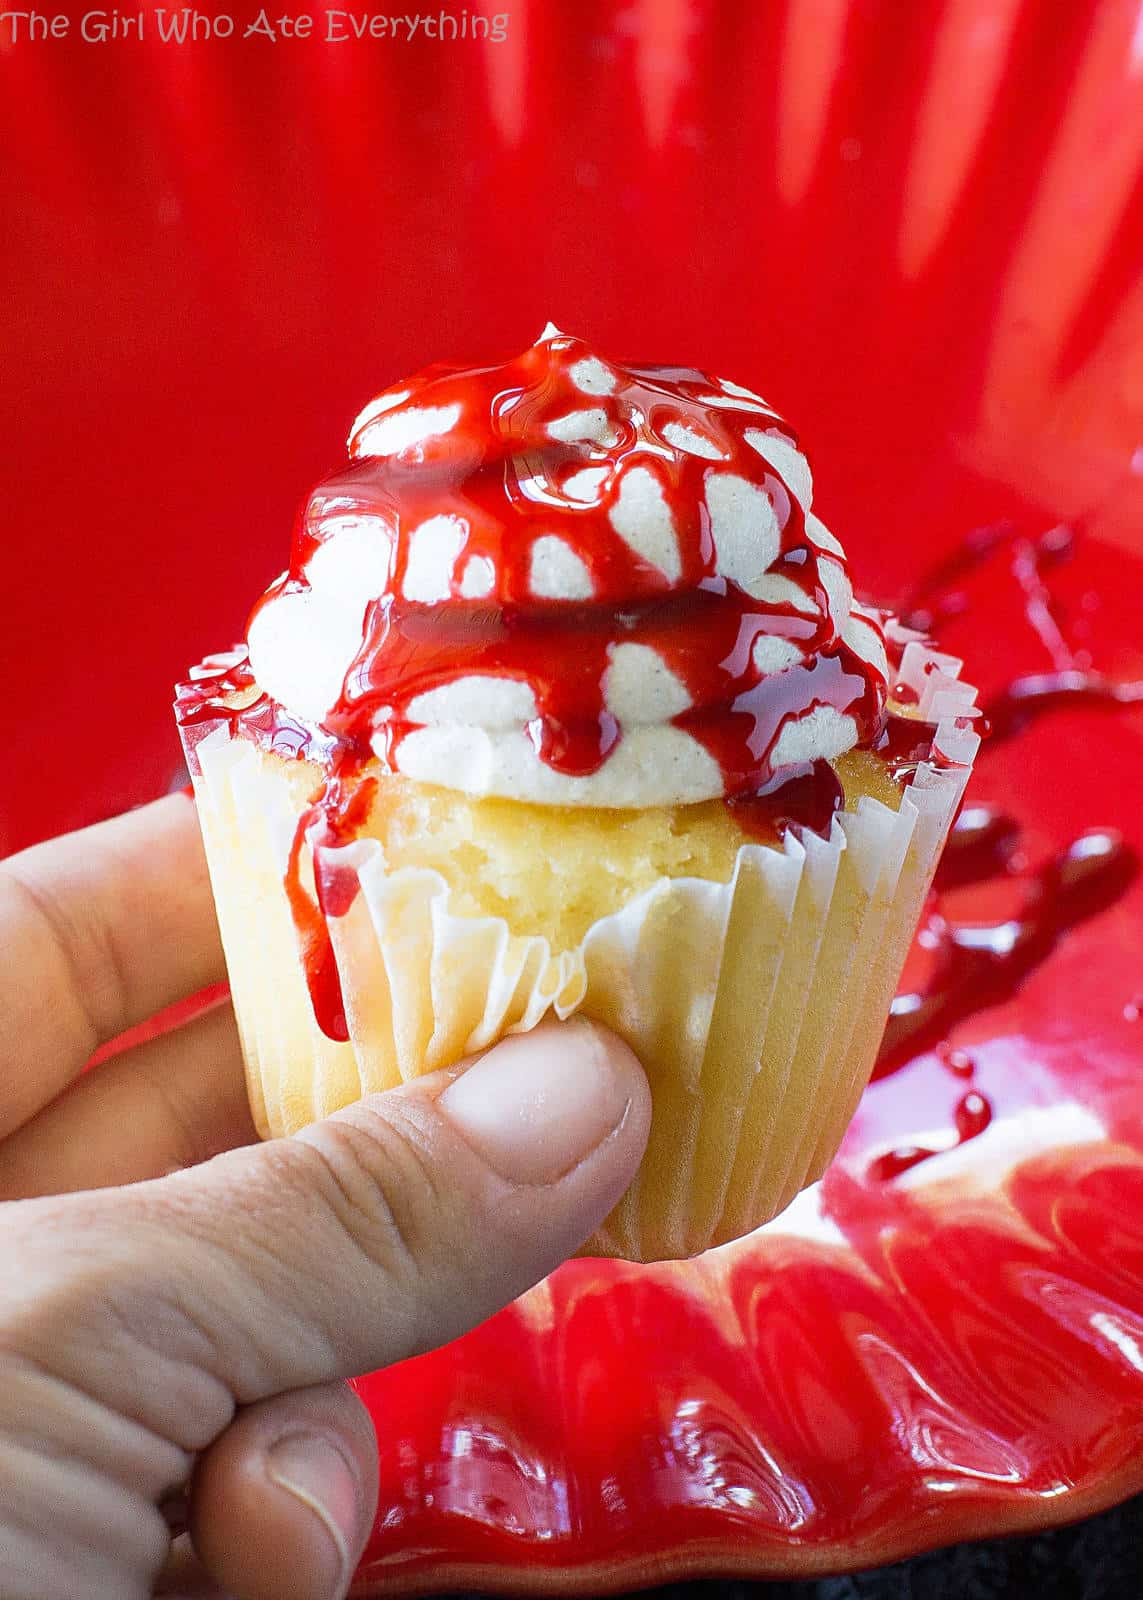 Bloody Halloween Cupcakes
 How to Make Edible Blood